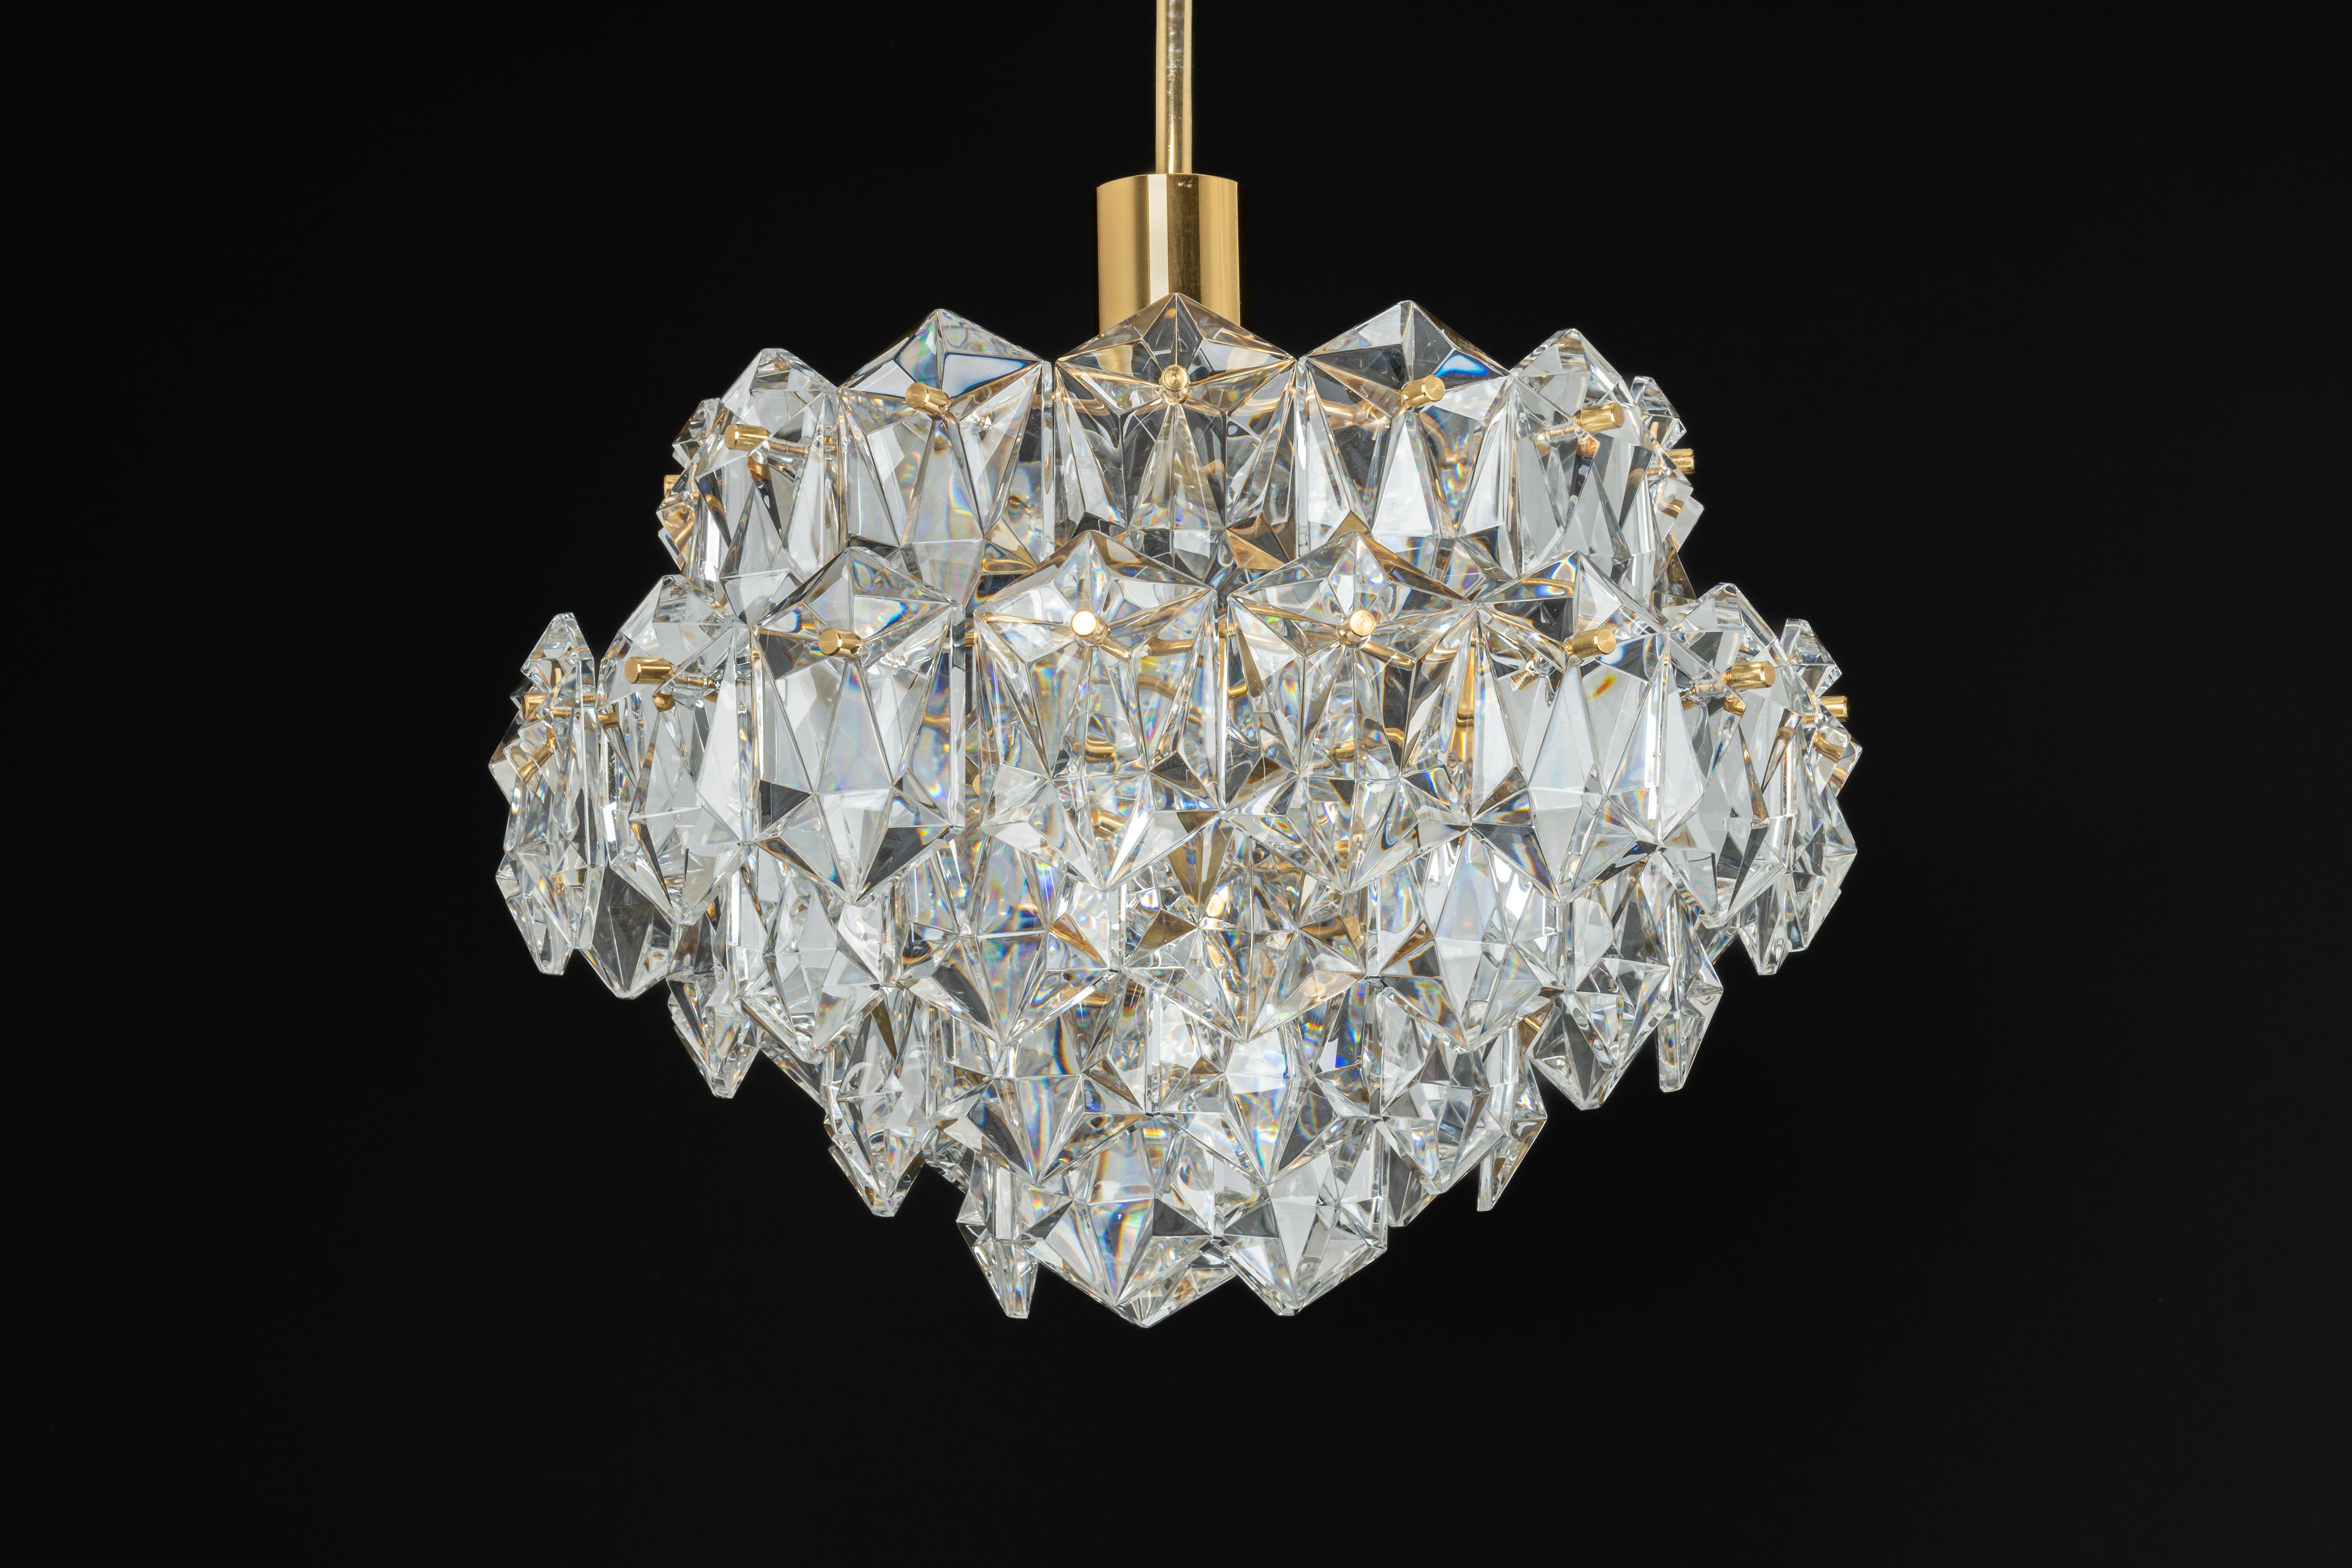 1 of 3 Stunning Chandelier, Brass and Crystal Glass by Kinkeldey, Germany, 1970s For Sale 2